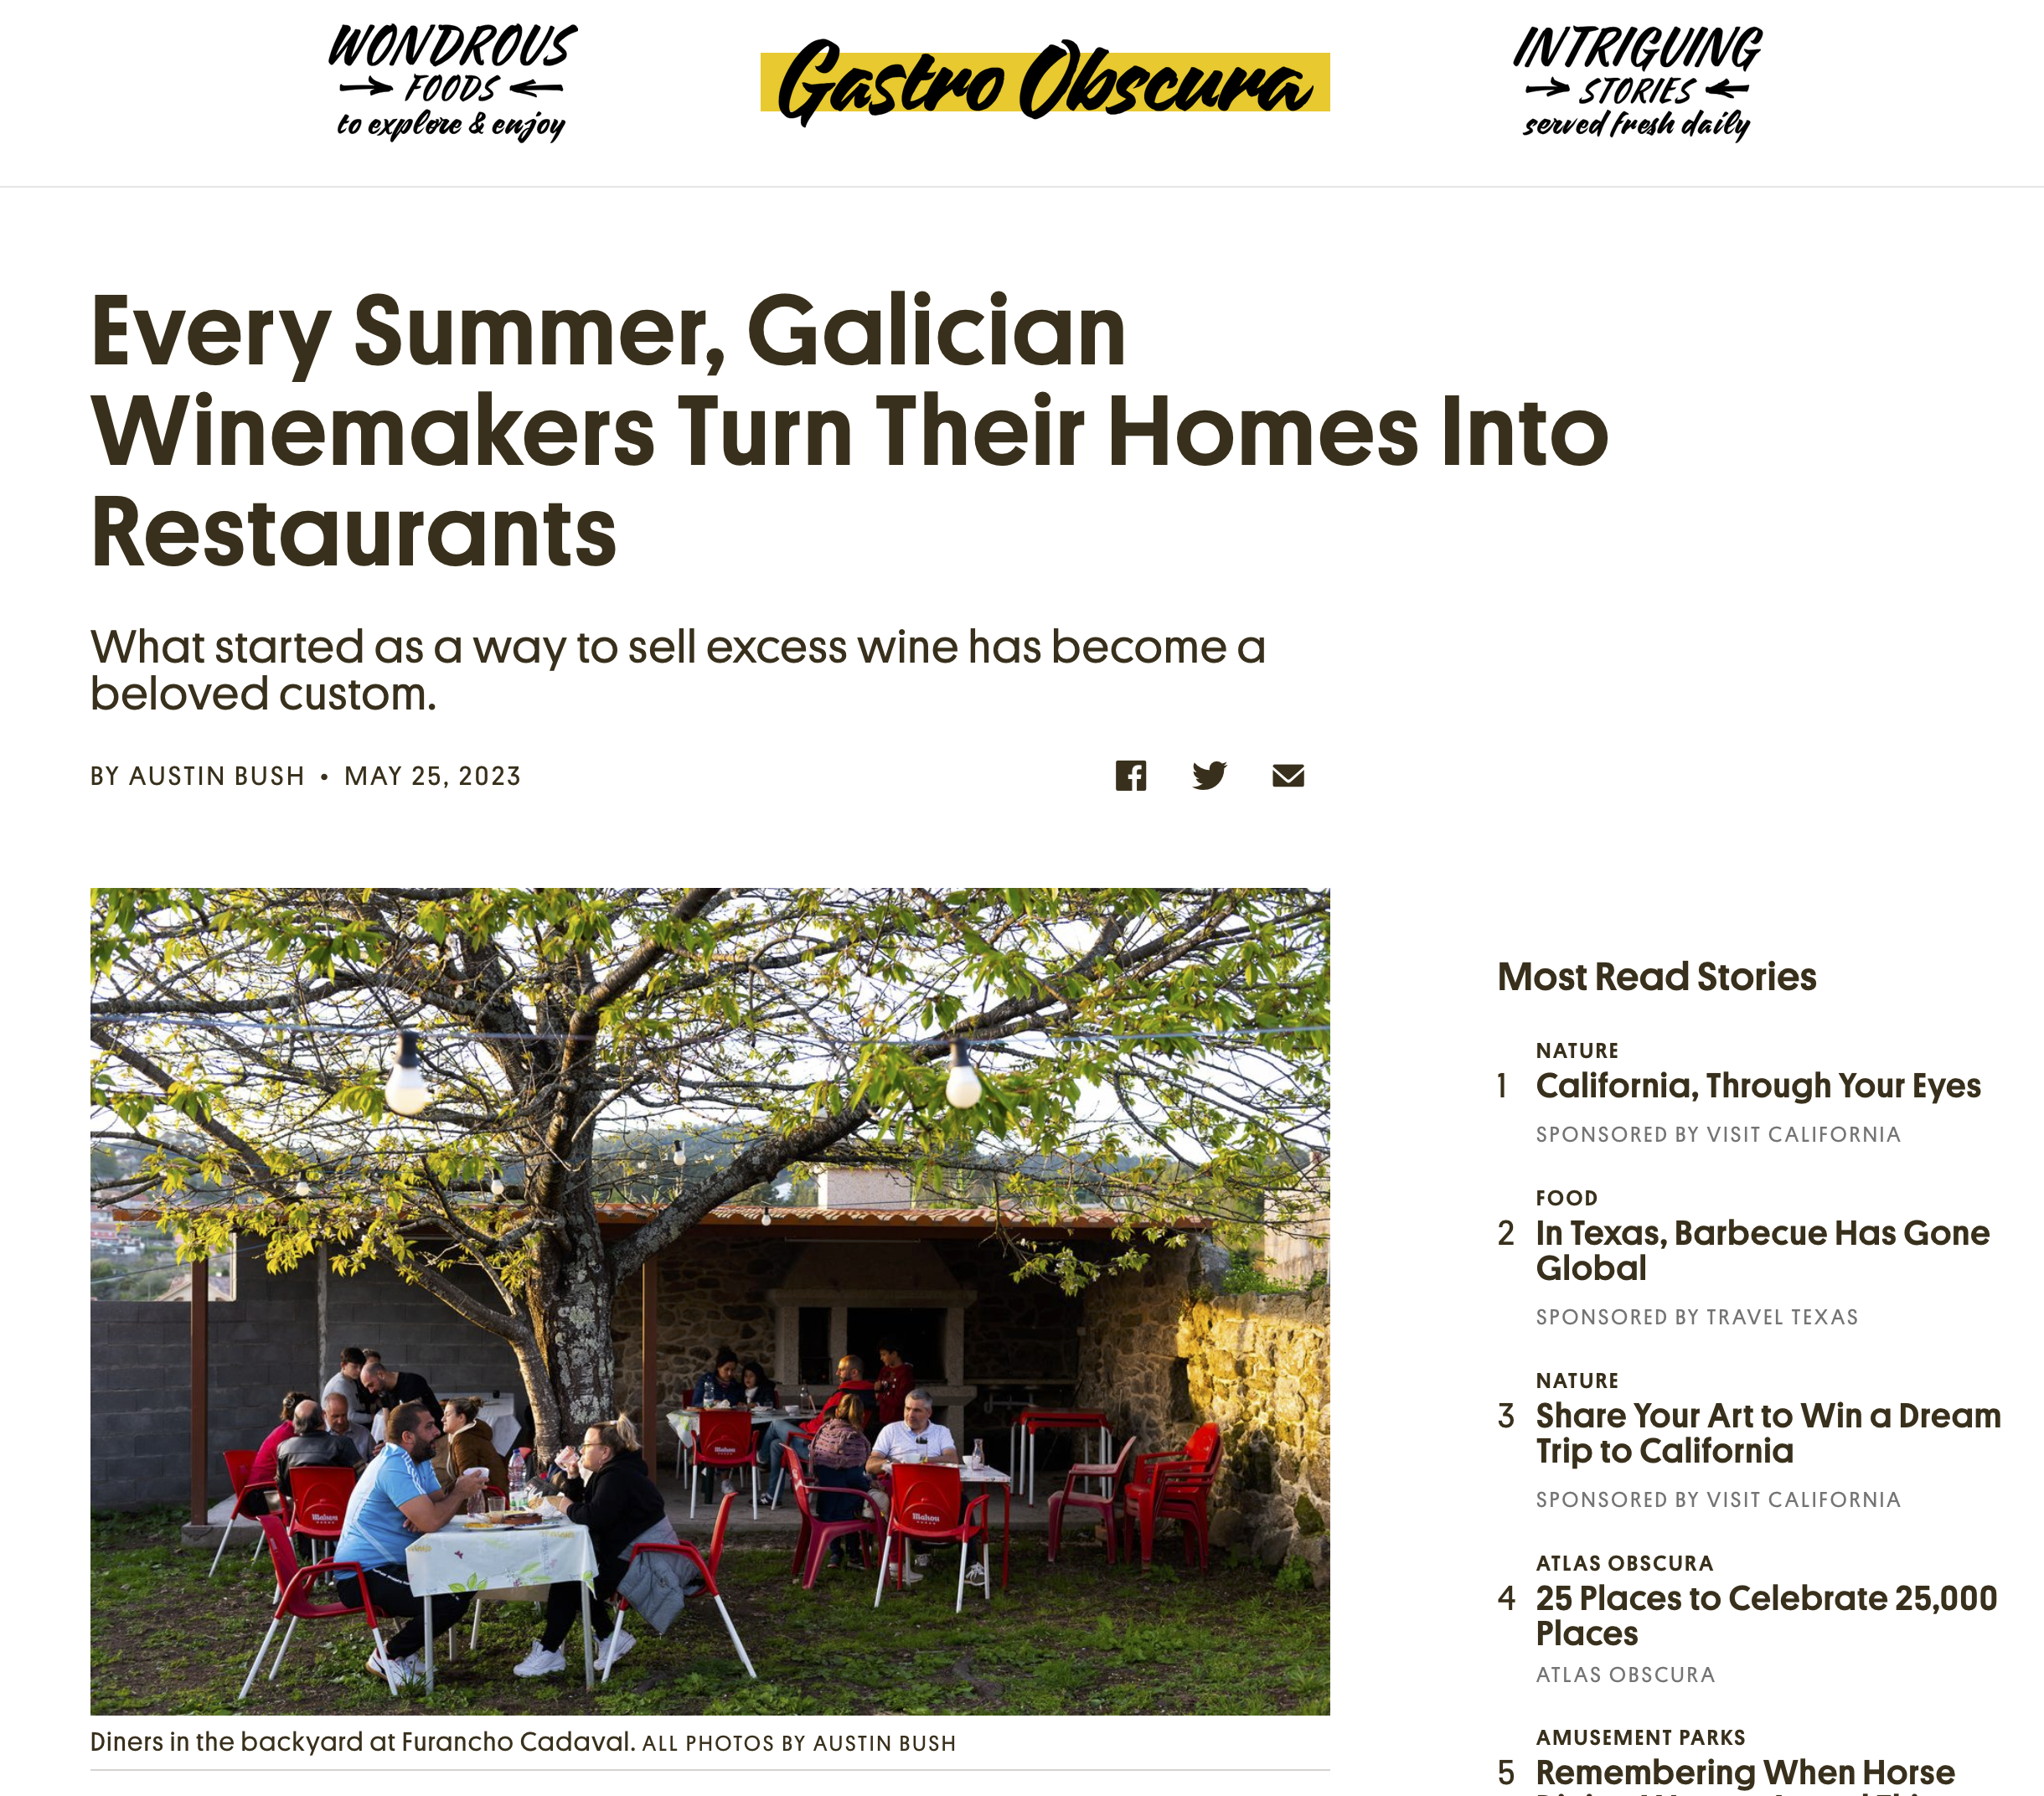  Text &amp; photos: “ Every Summer, Galician Winemakers Turn Their Homes Into Restaurants ,” Gastro Obscura 